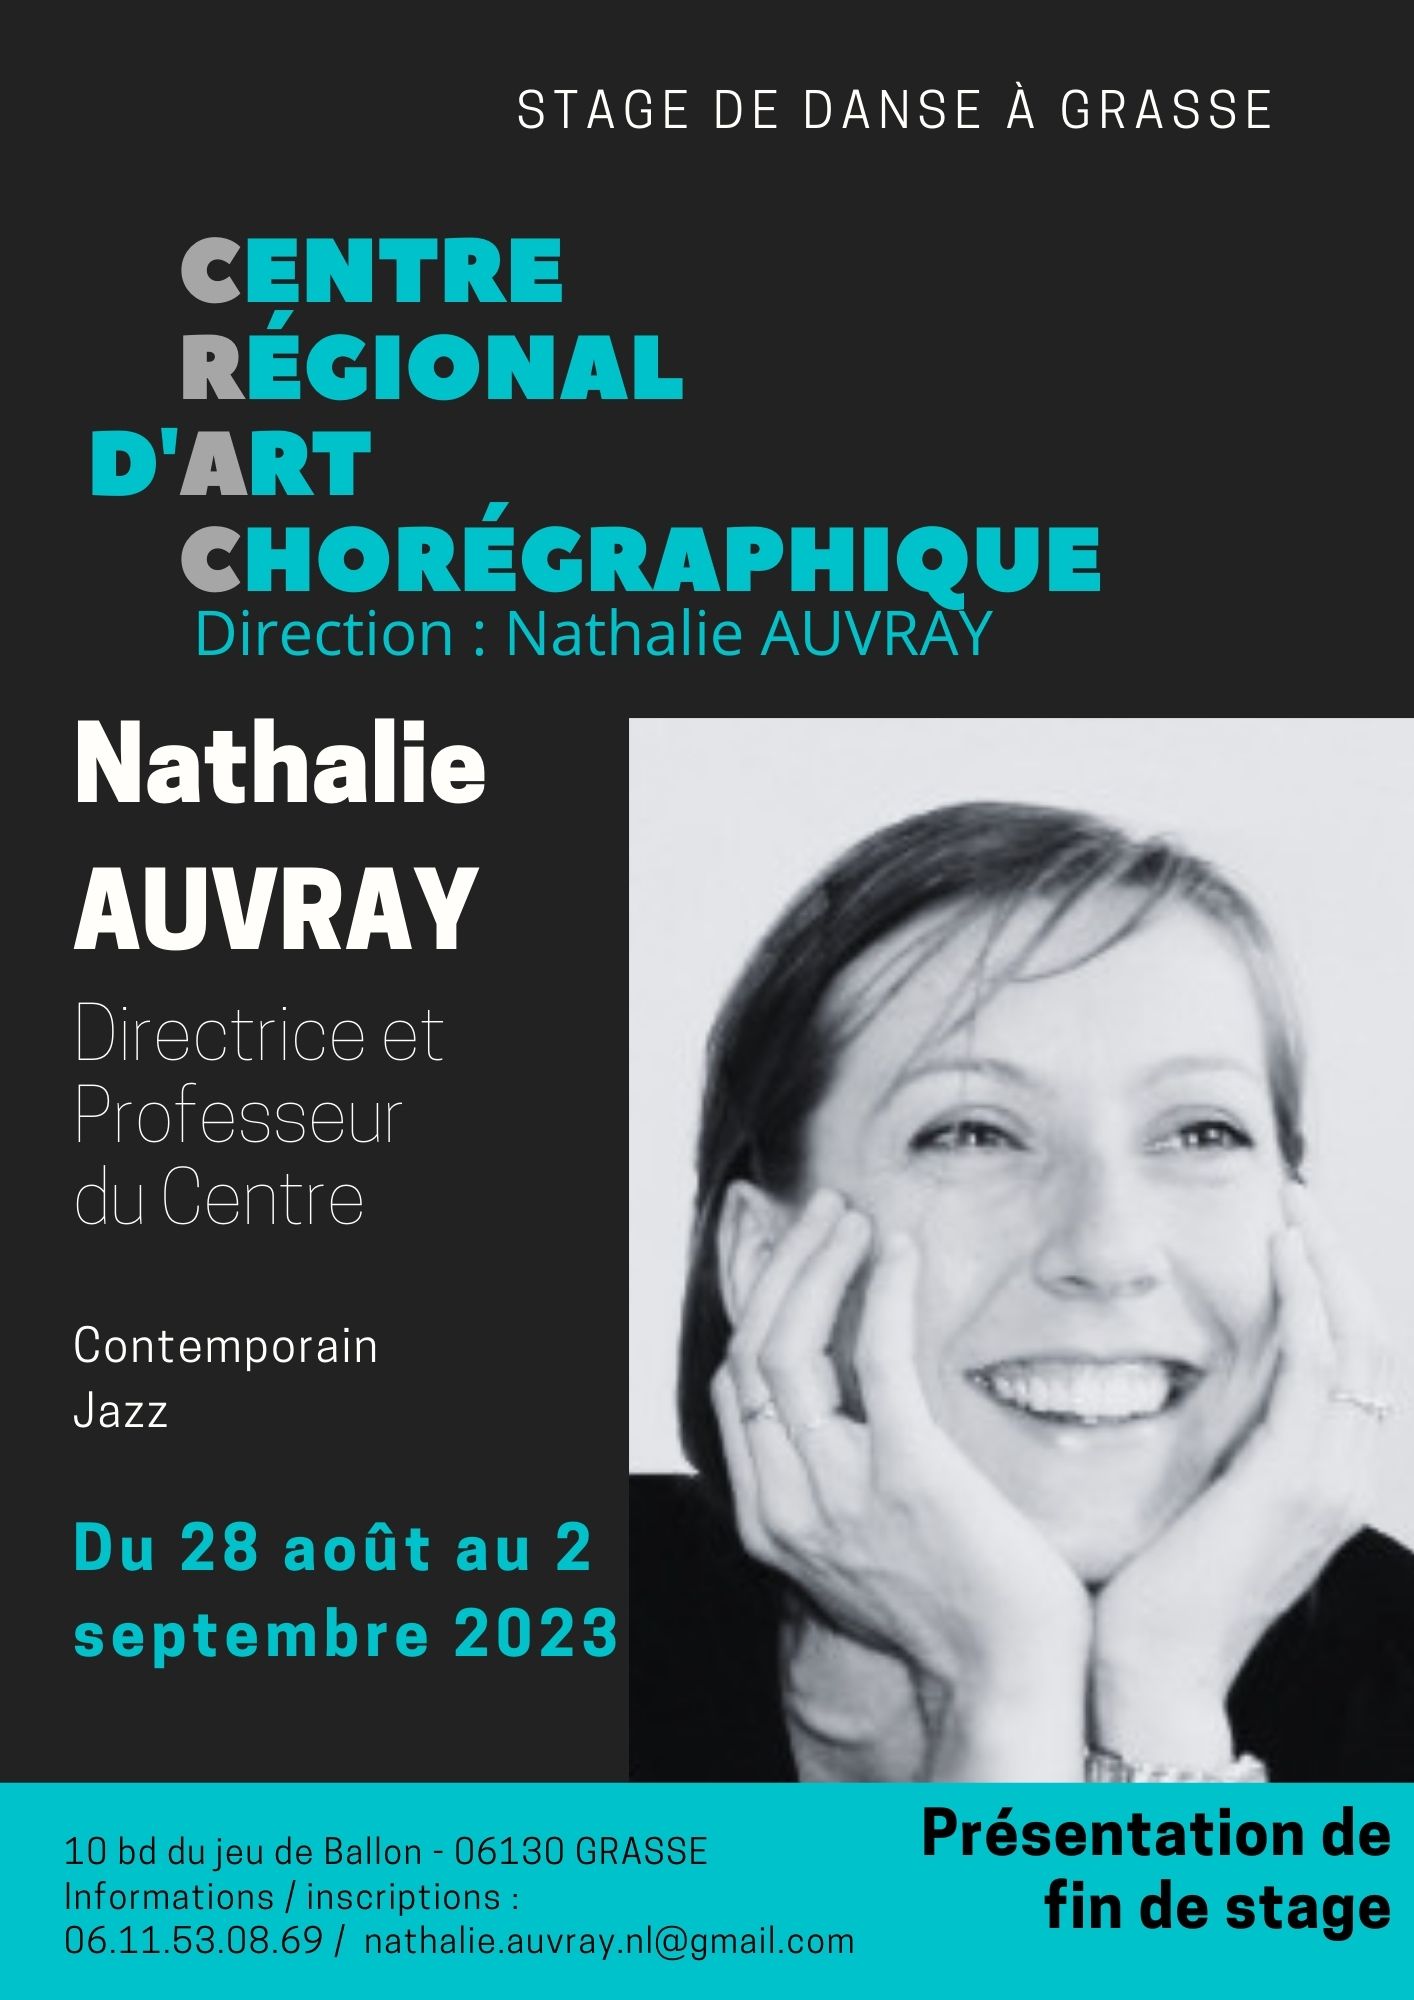 NATHALIE AUVRAY